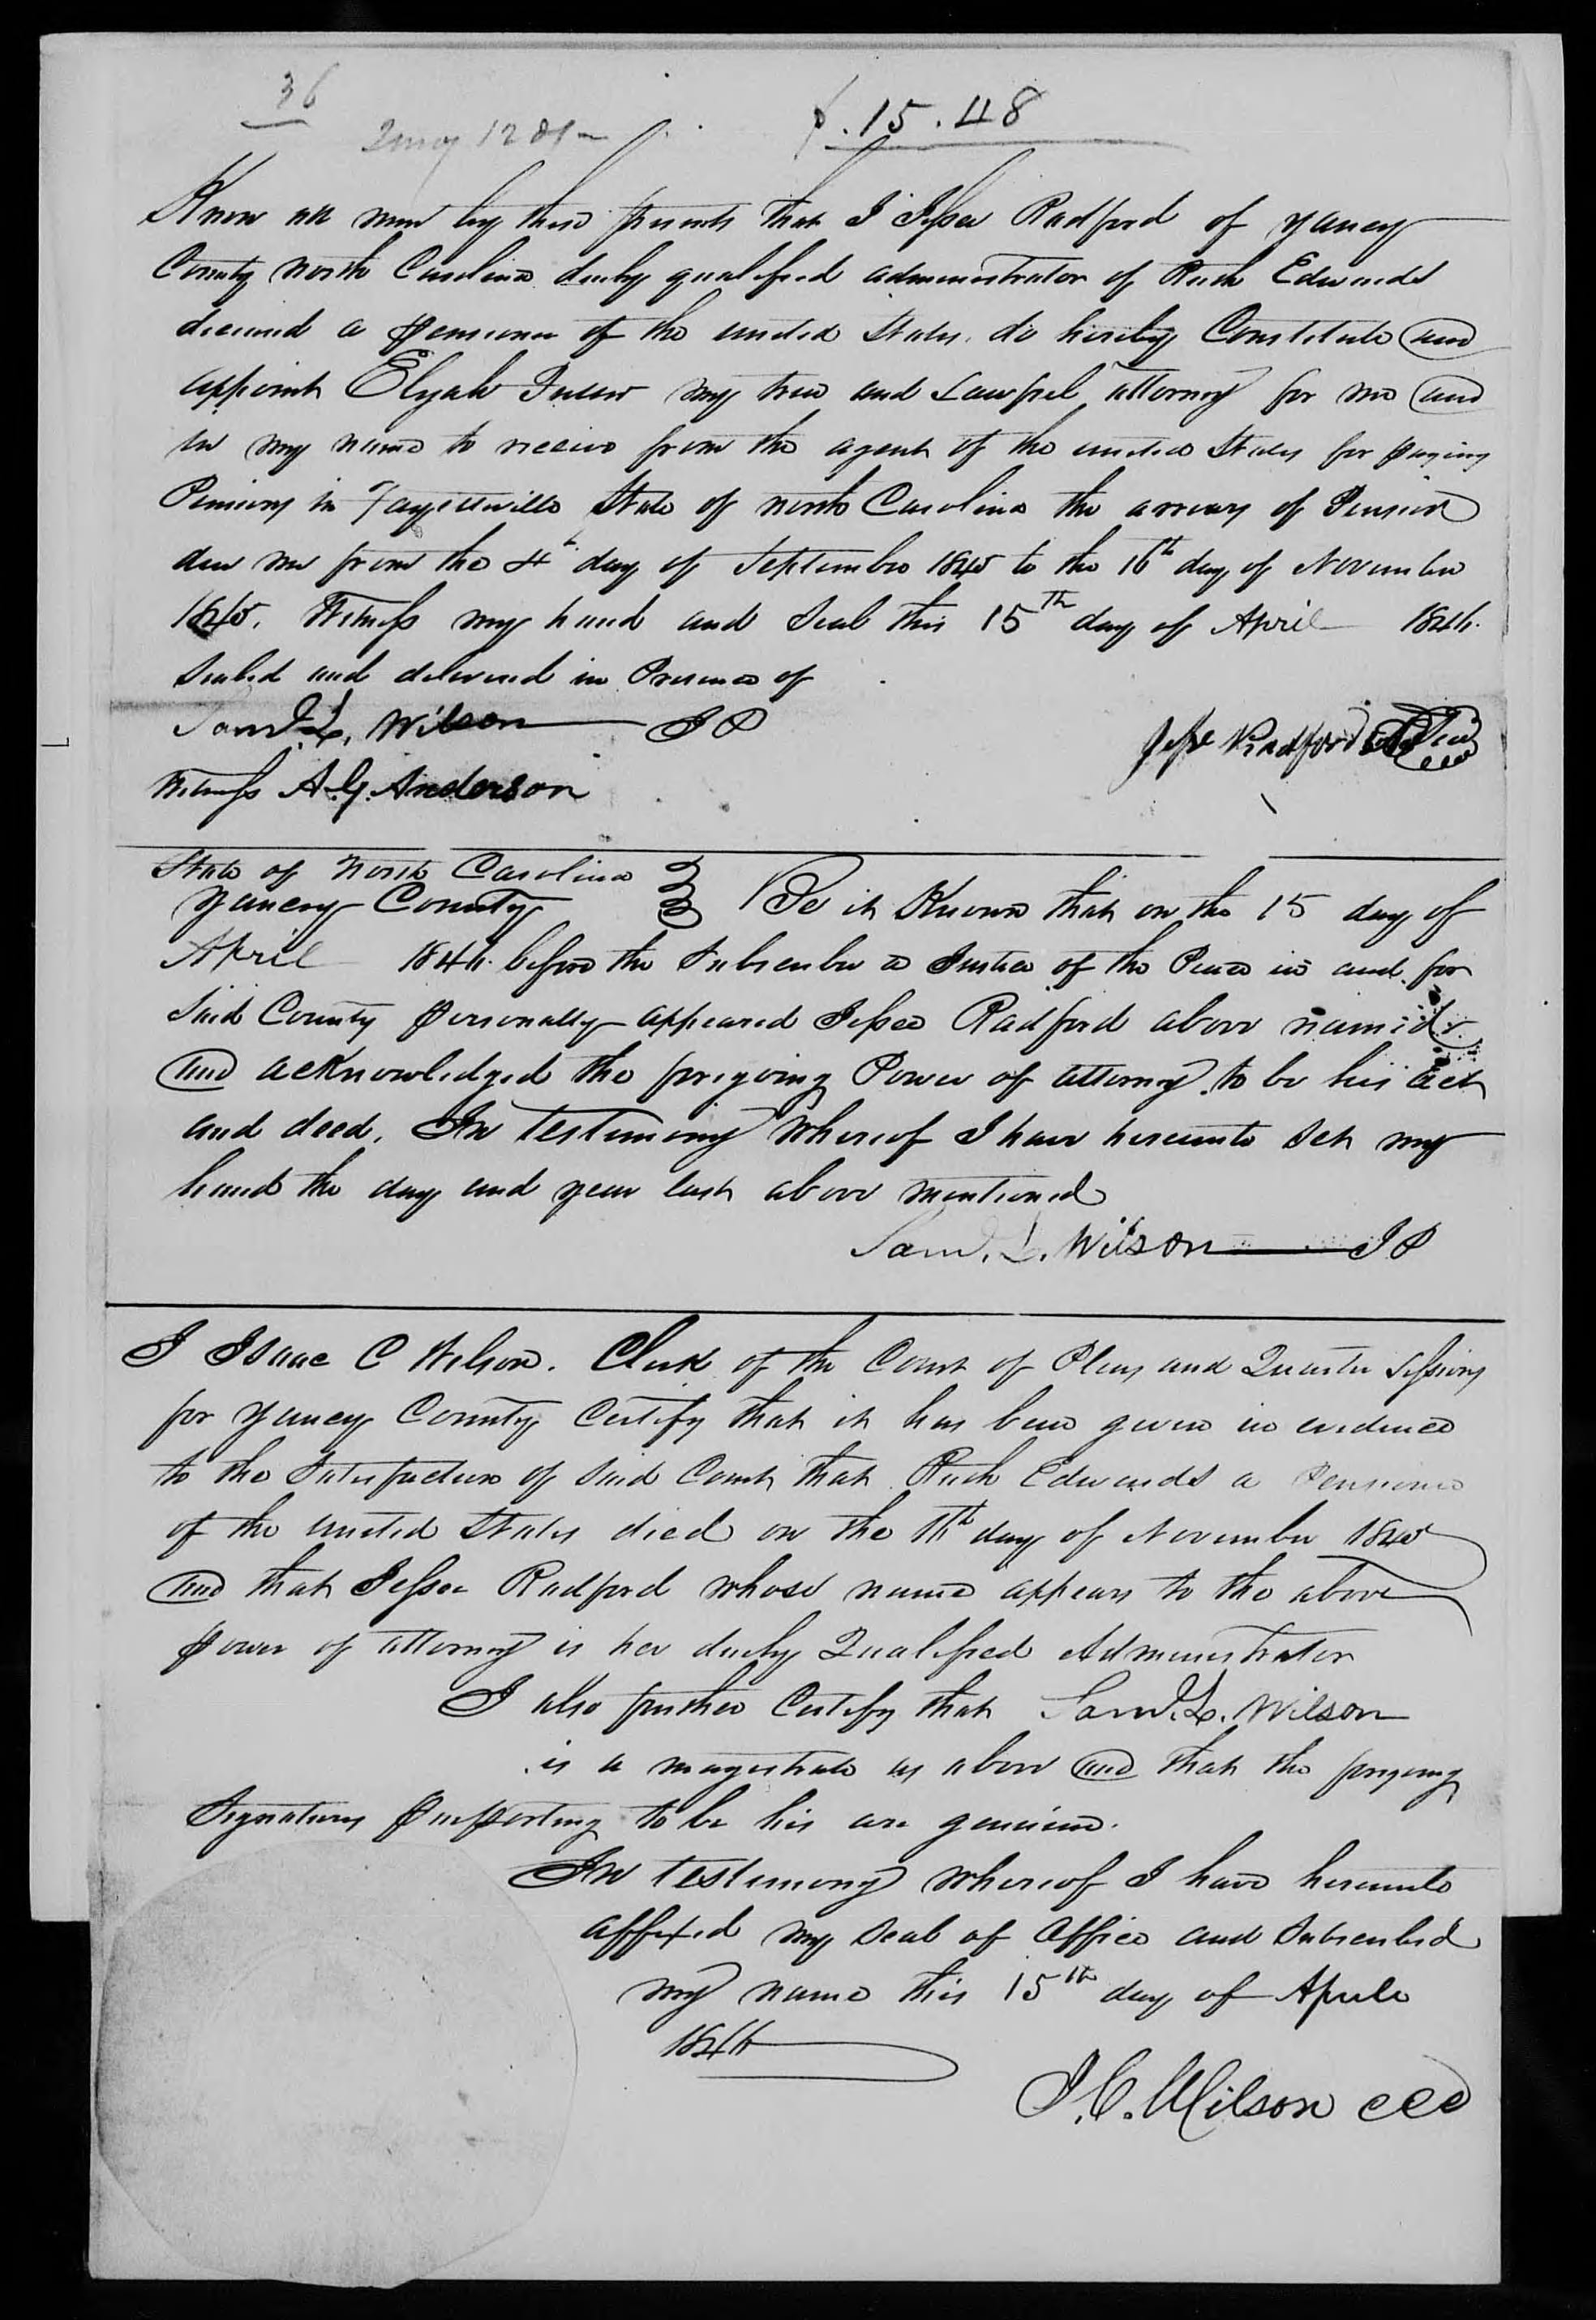 Power of Attorney appointing Elijah Fuller for Ruth Edwards, 15 April 1844